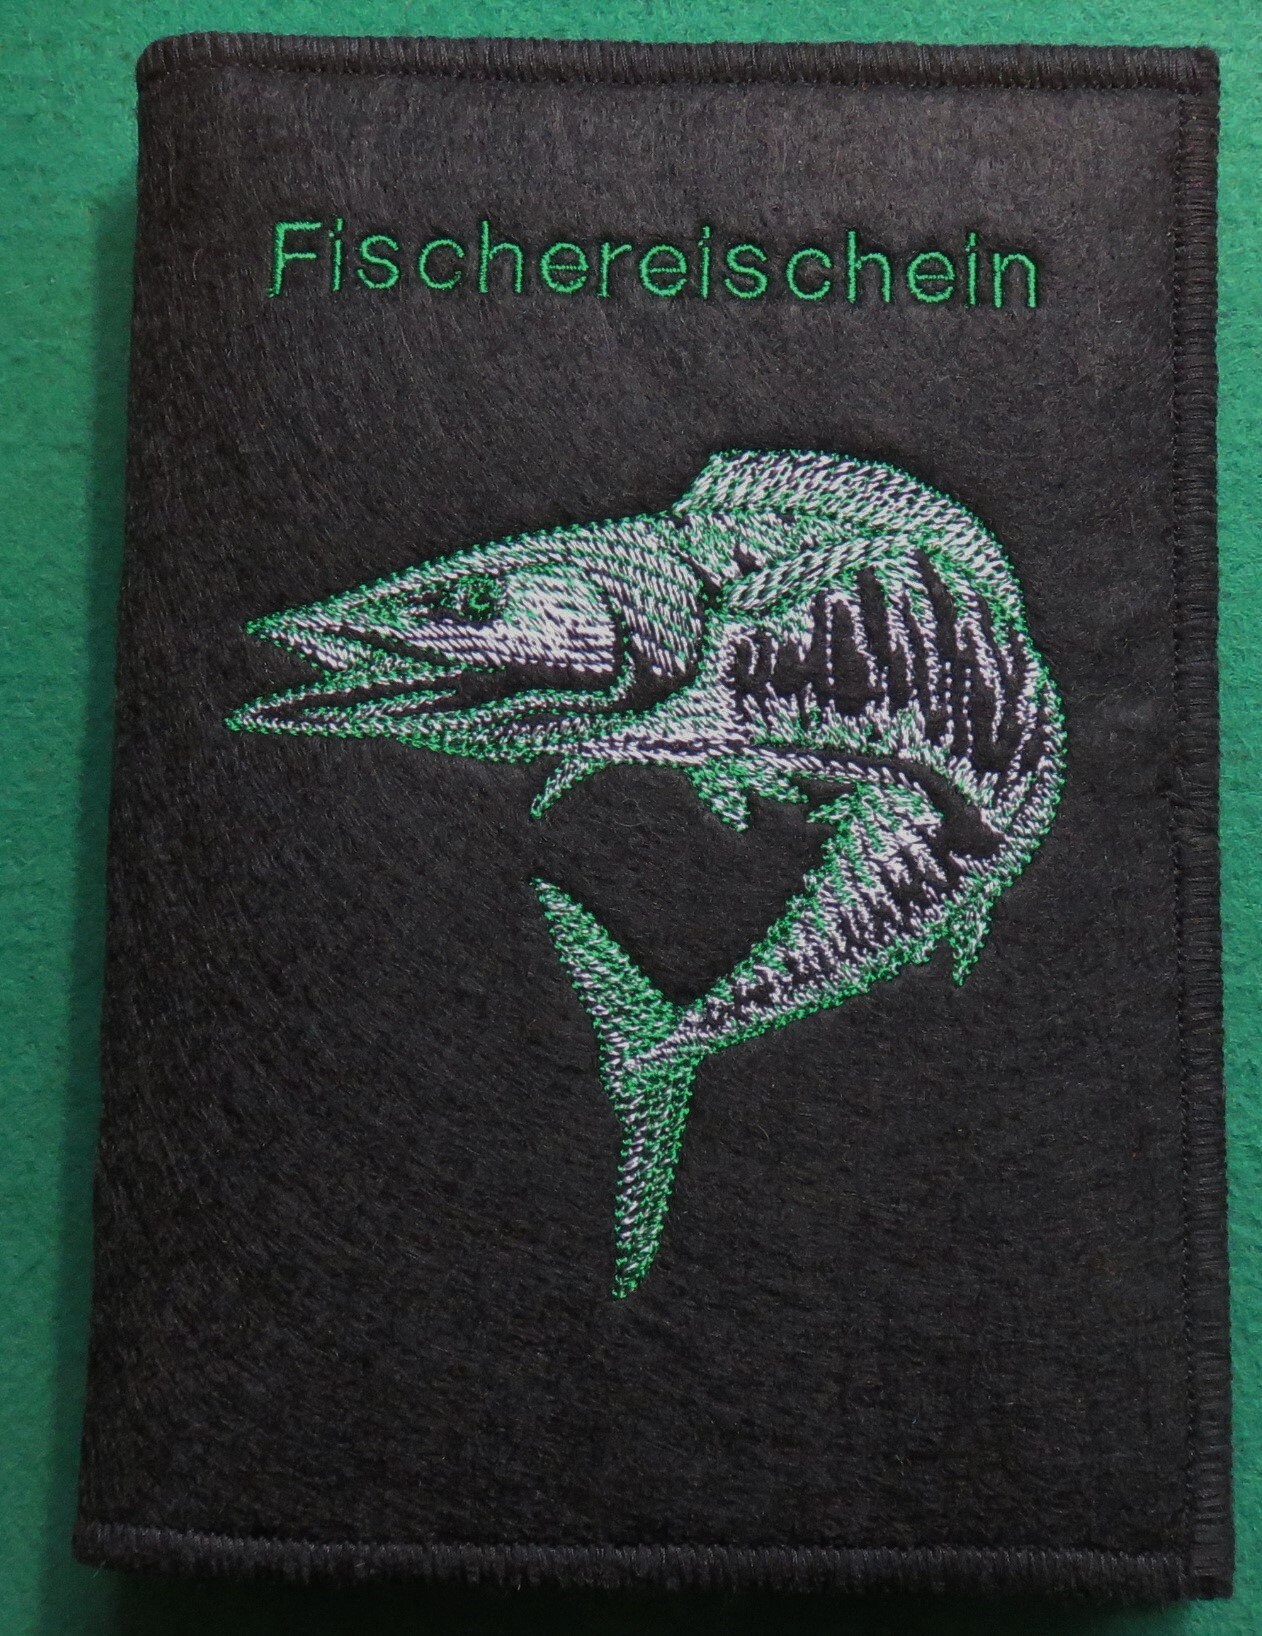 Fishing License / Fishing License, Individually Embroidered Felt Cover,  Motif: Barracuda, Large Selection of Colors -  Sweden